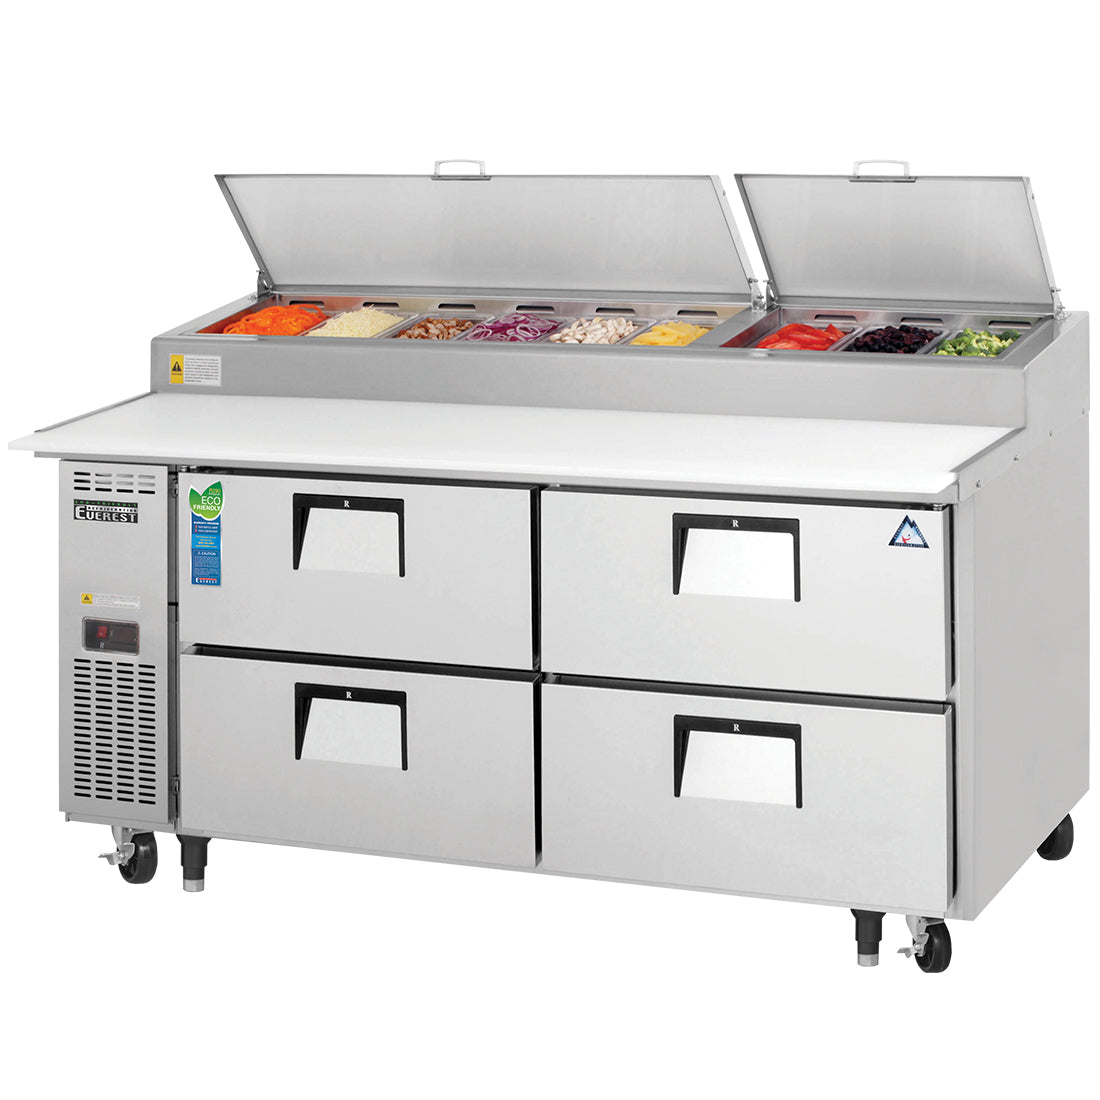 Everest EP Series-EPPR2-D4 Two Section Four Drawer Side Mount Pizza Prep Table - 23 Cu. Ft.